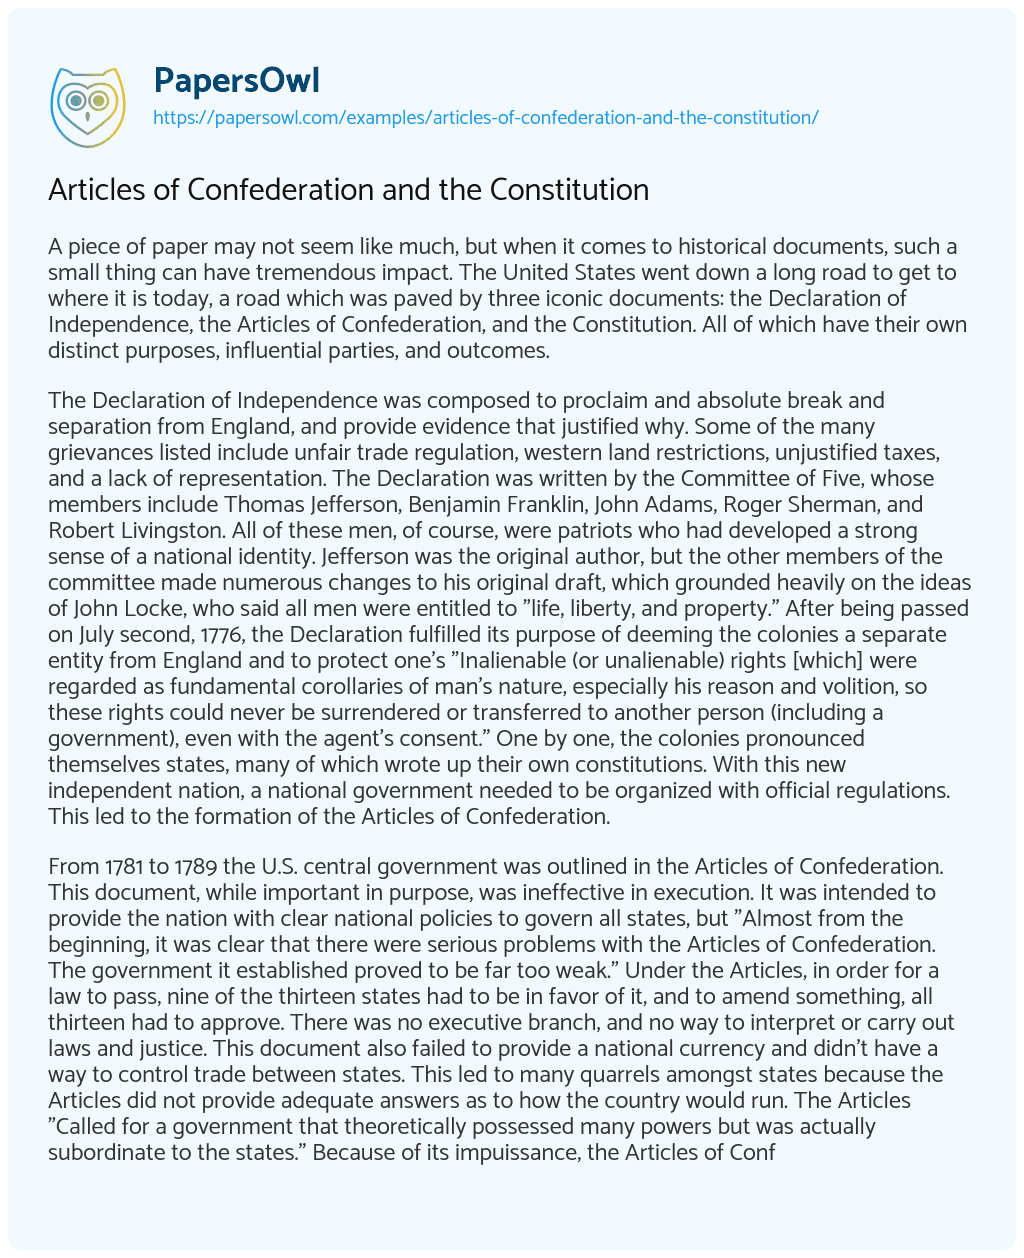 Essay on Articles of Confederation and the Constitution